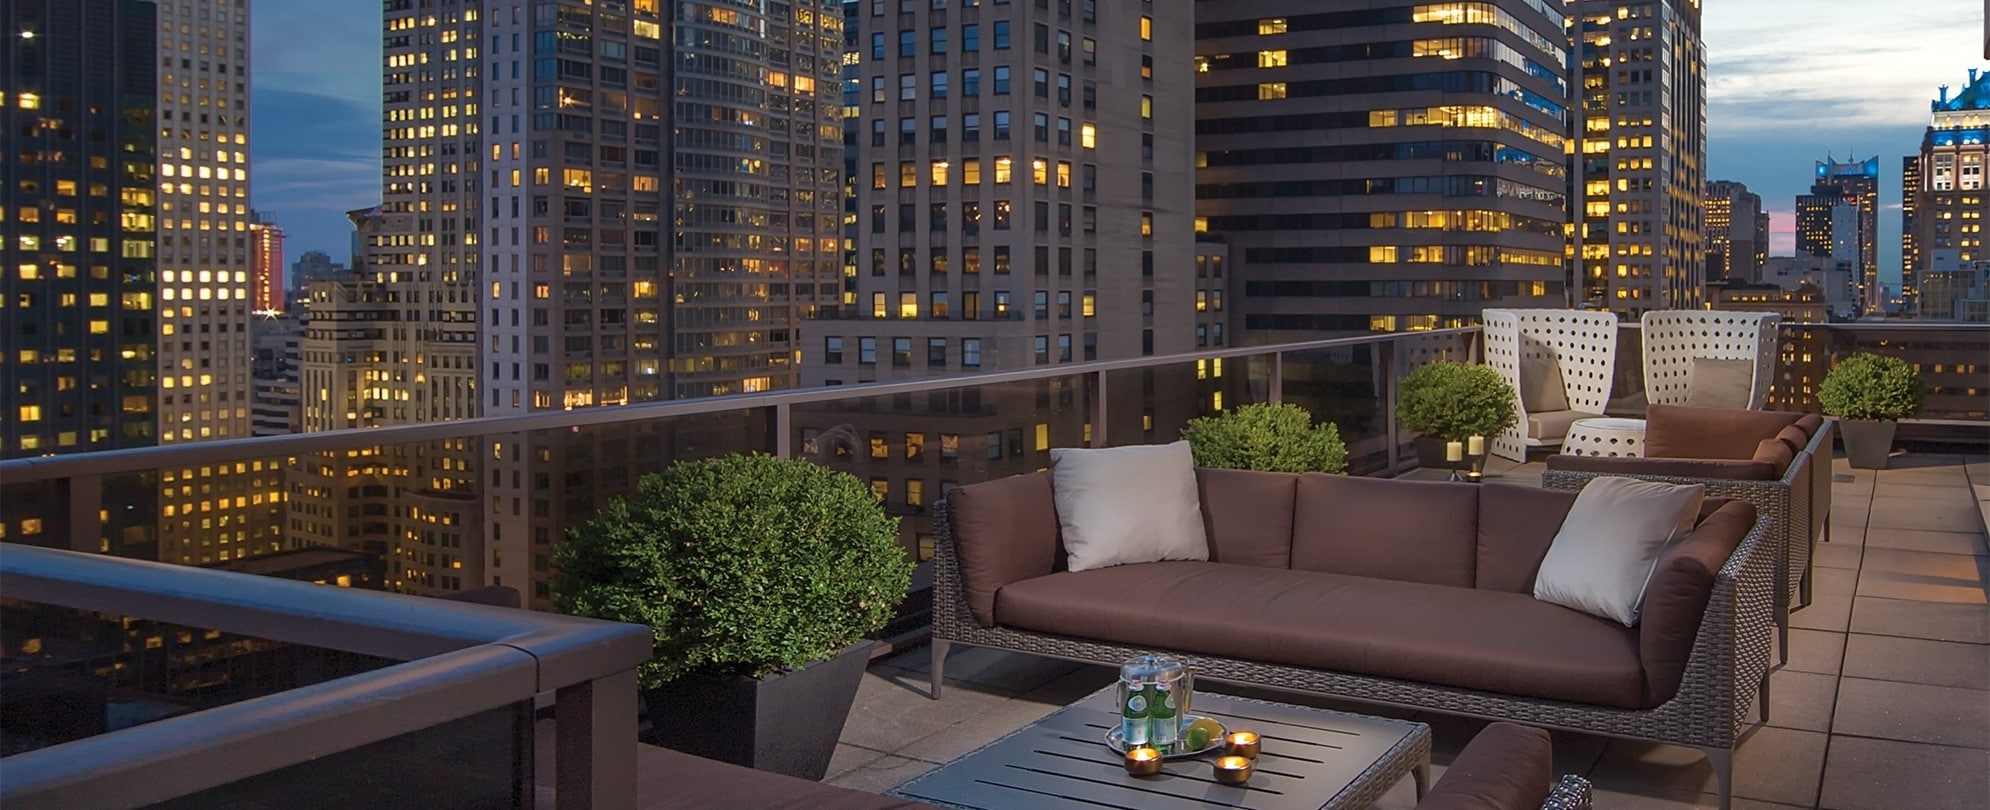 The rooftop patio at Club Wyndham Midtown 45, a timeshare resort in New York City, overlooking skyscrapers lit up at night.